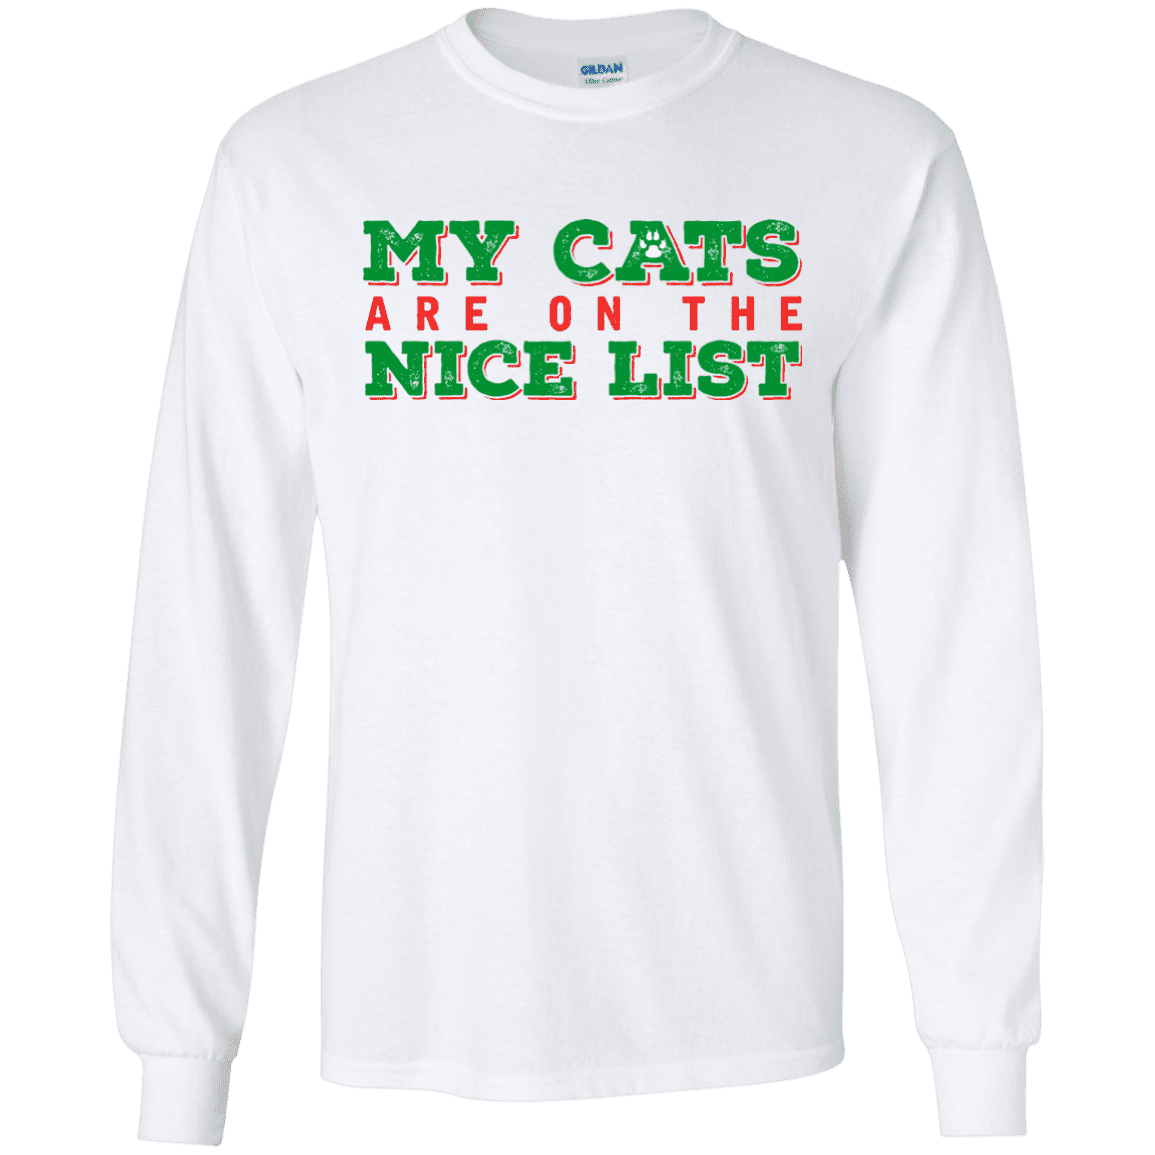 My Cats Are On The Nice List - White Long Sleeve T-Shirt.